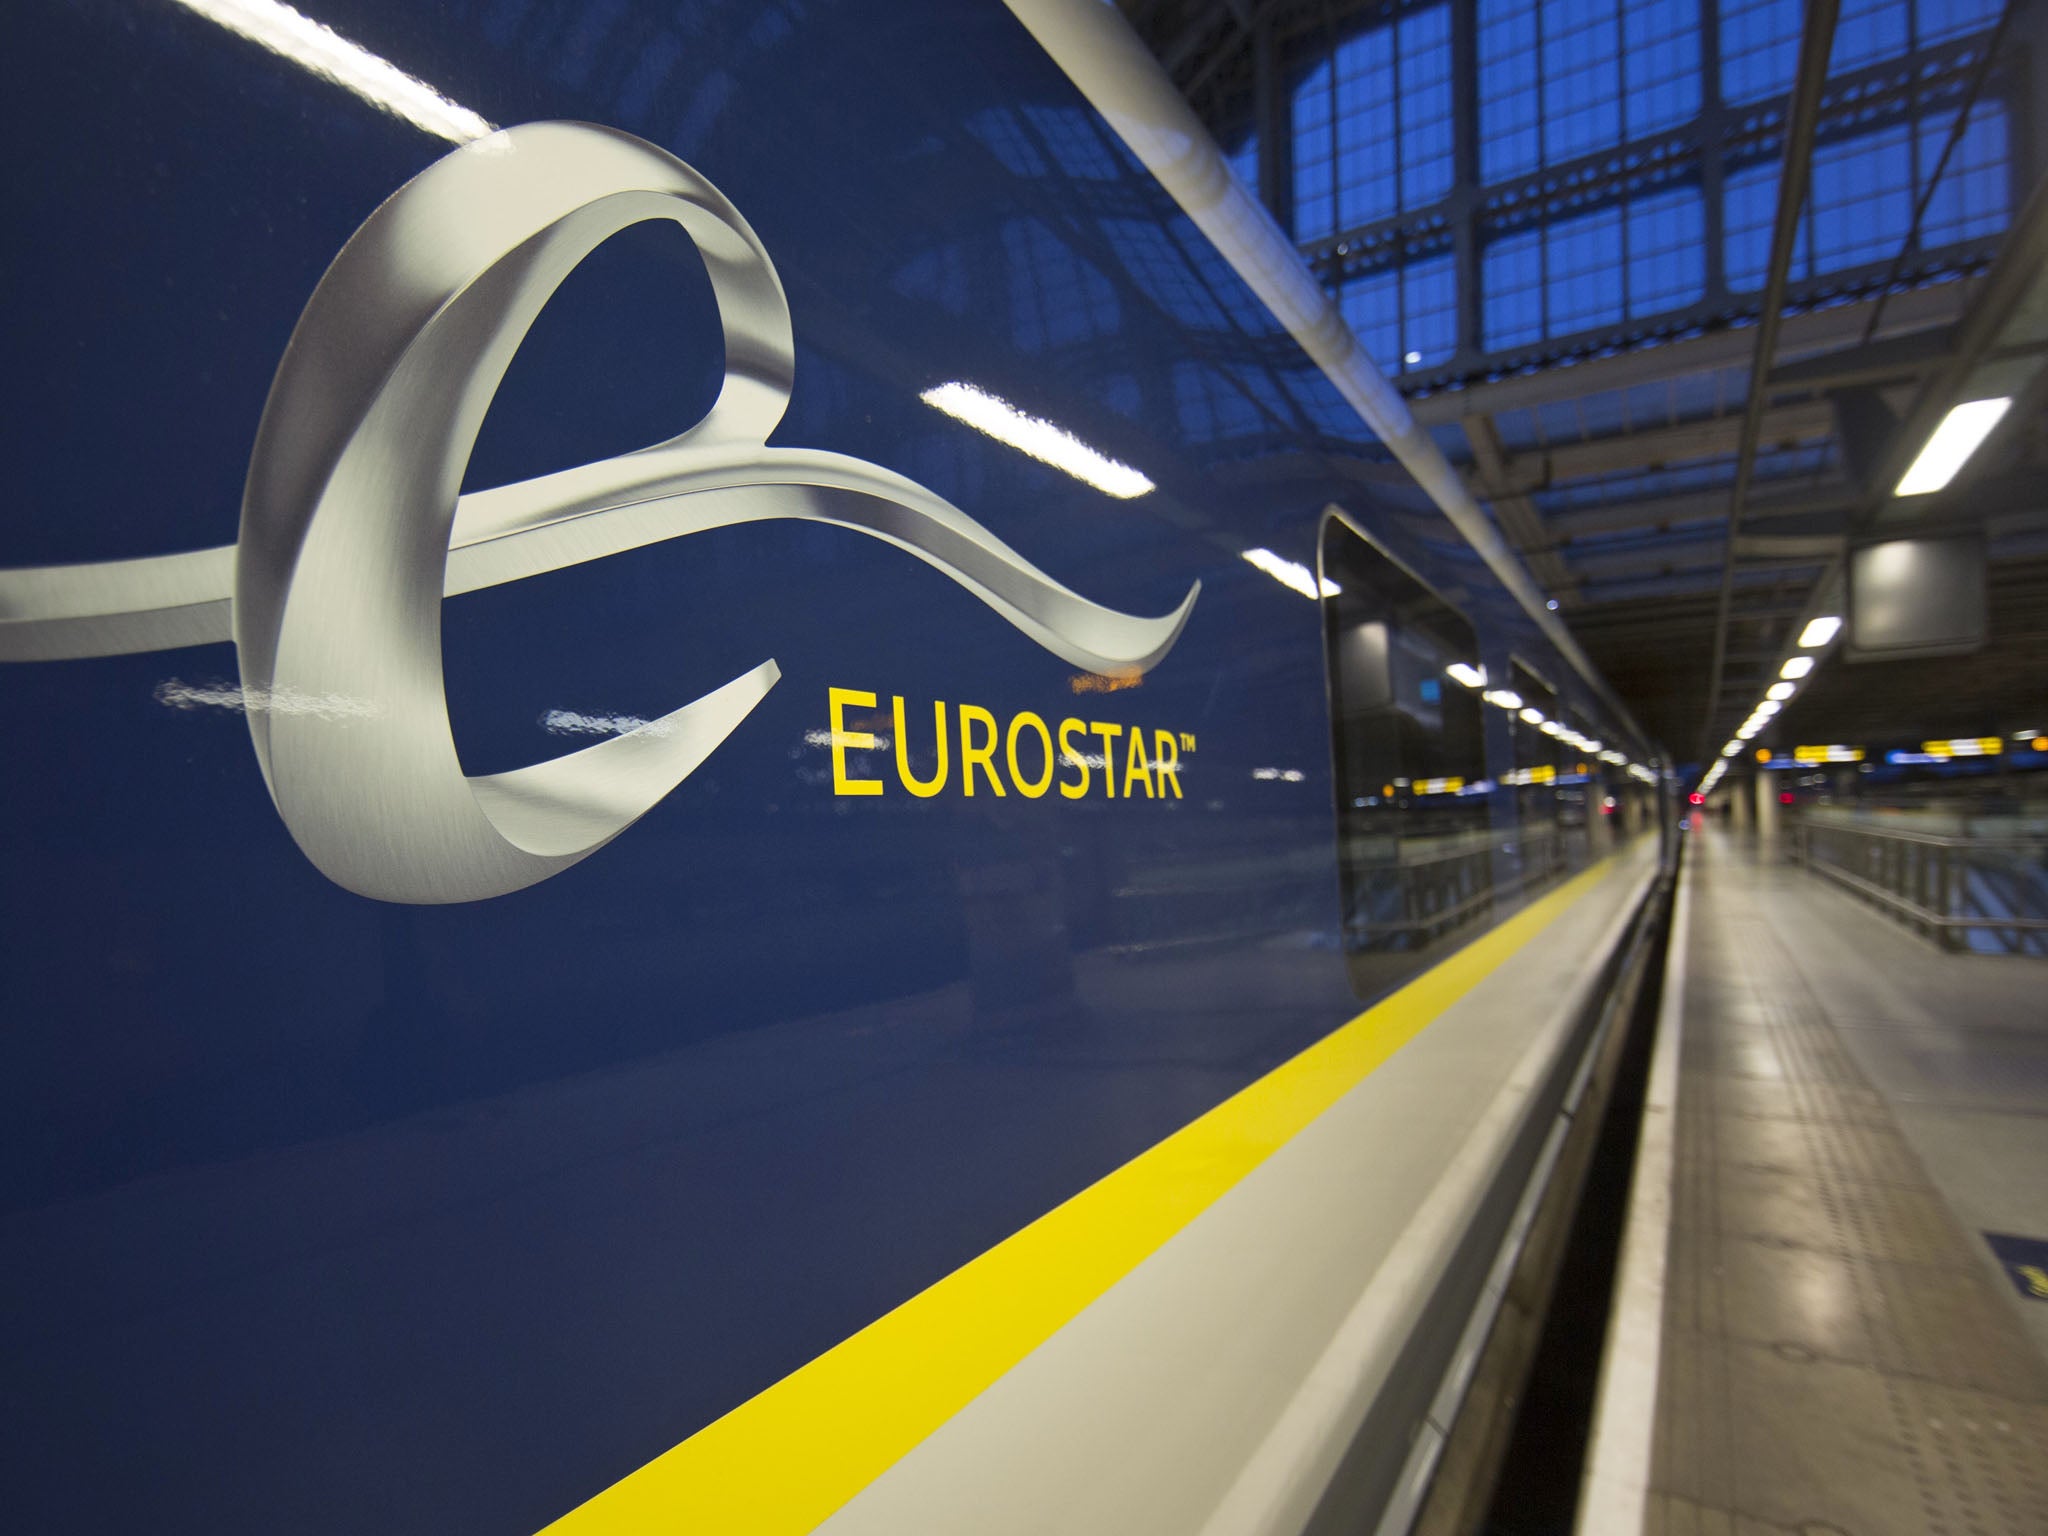 Follow what it's like to travel on the first direct train service from London to Amsterdam live